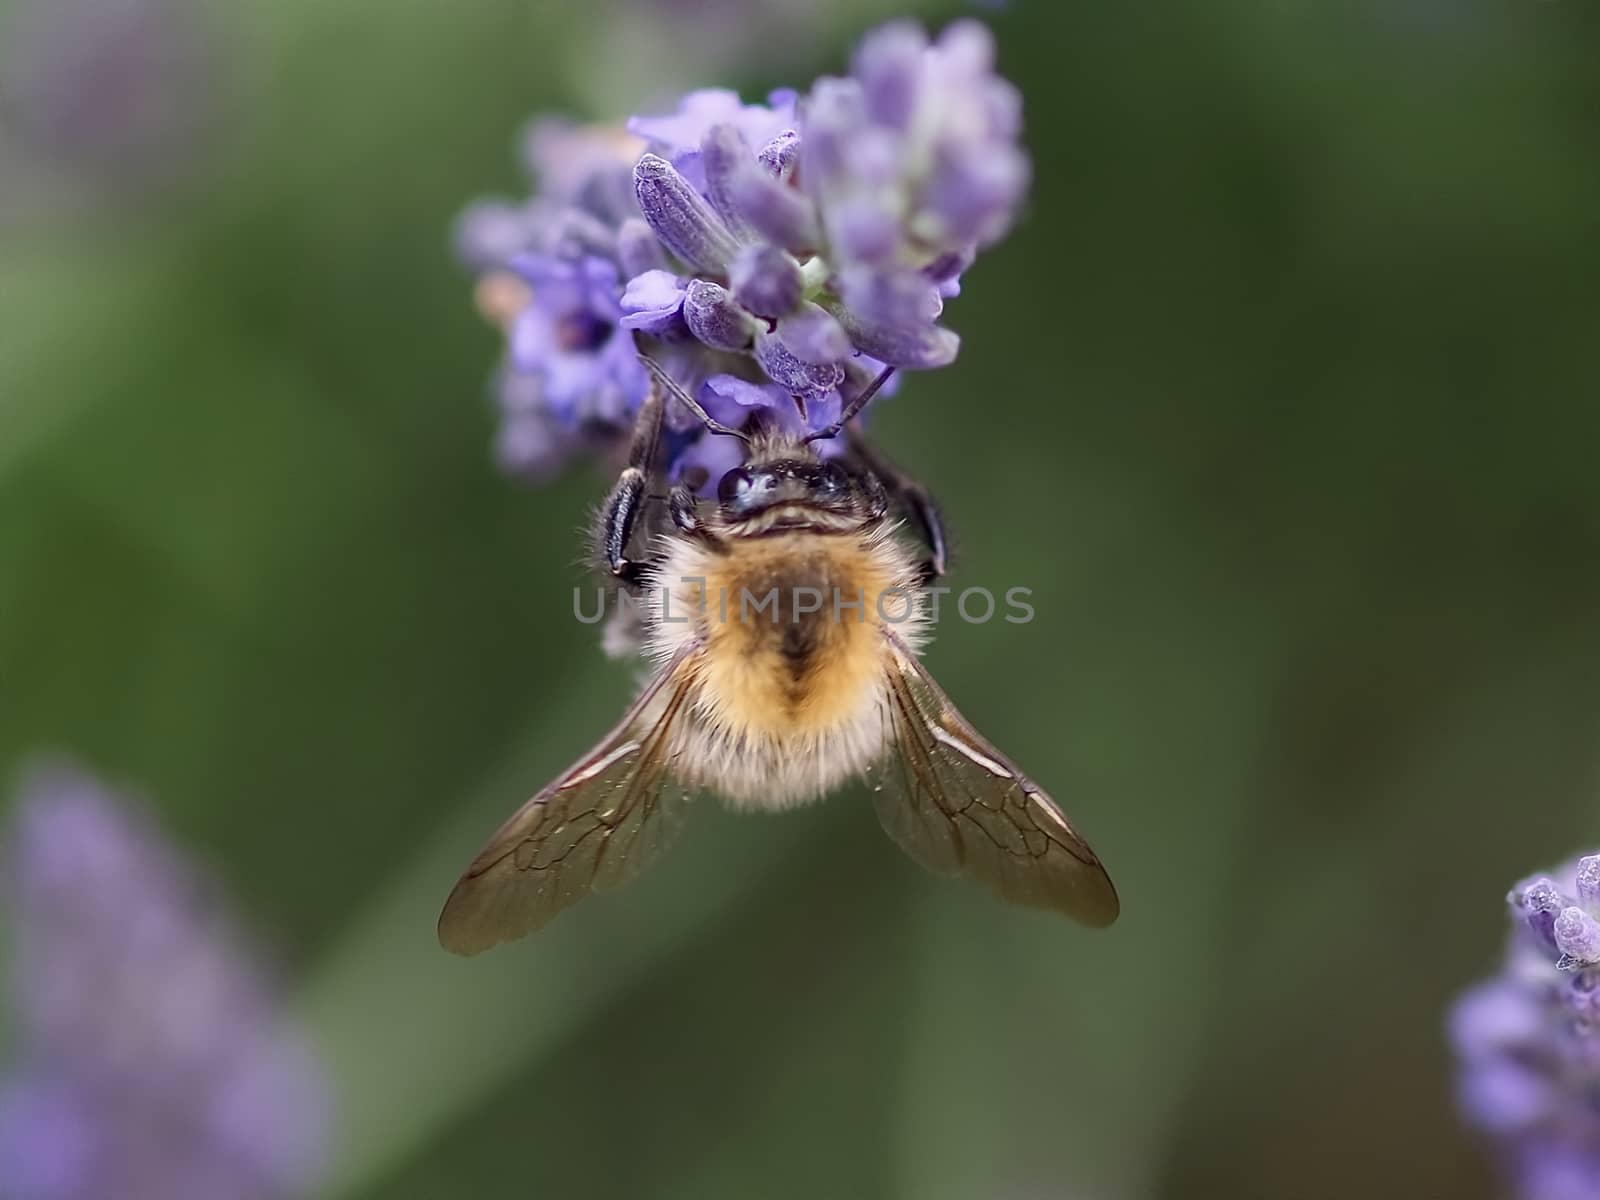 Macro of a humble bee on a lavender flower